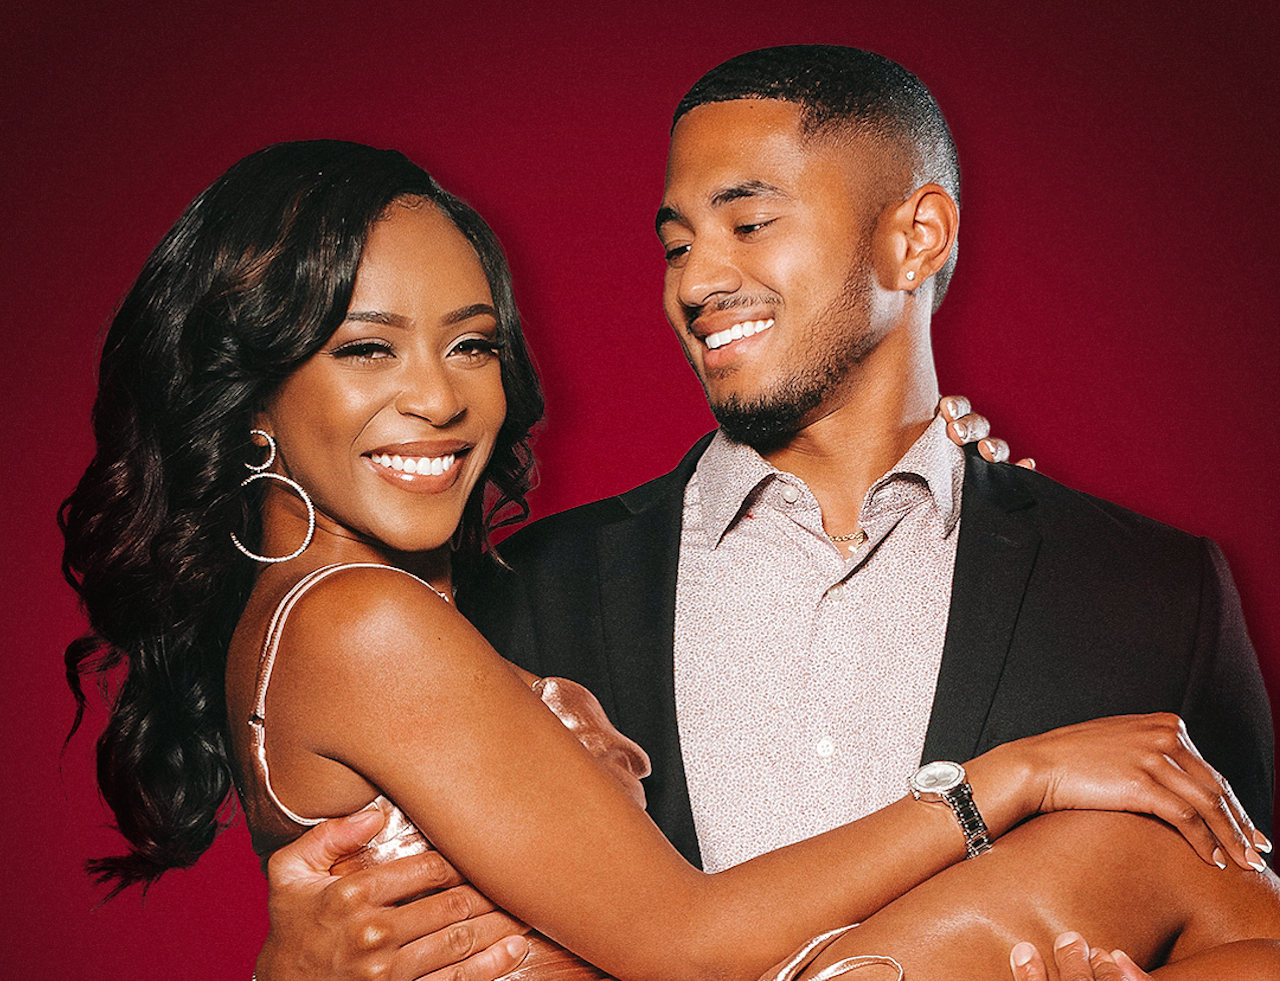 Are The Ultimatum’s Shanique and Randall Still Together?